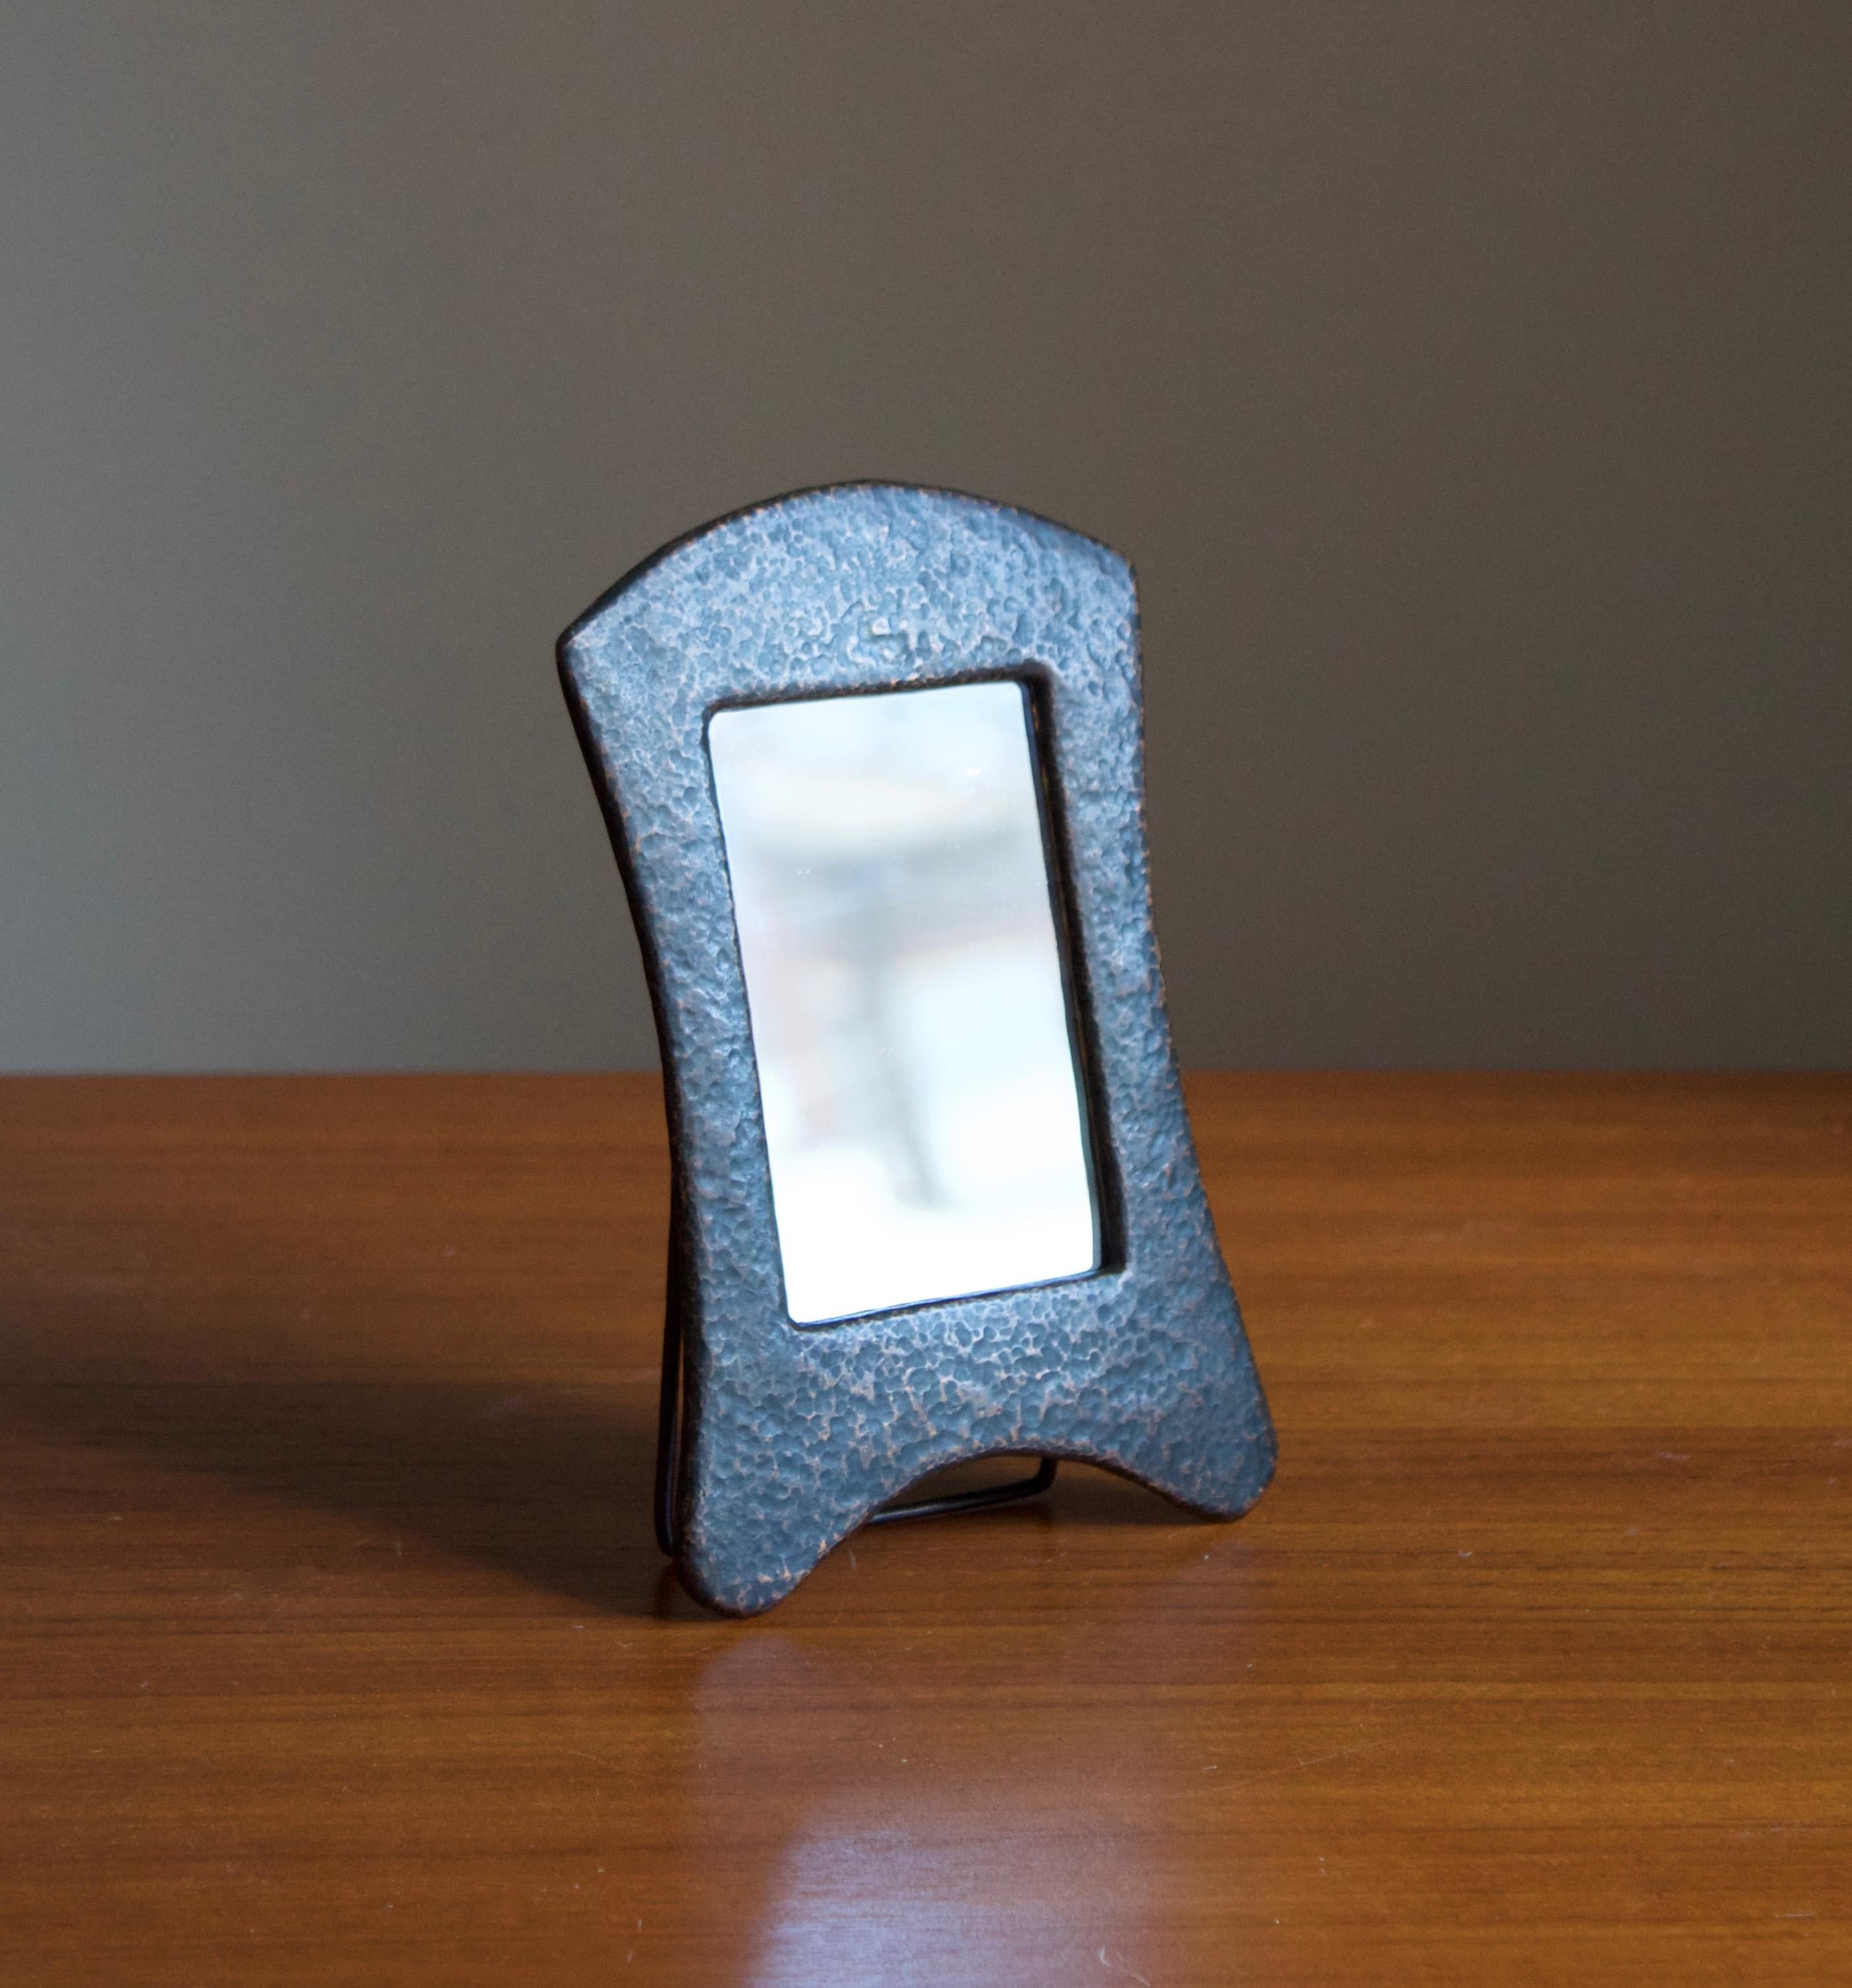 A petit table mirror. Designed and produced in Sweden, 1930s. In hammered copper.